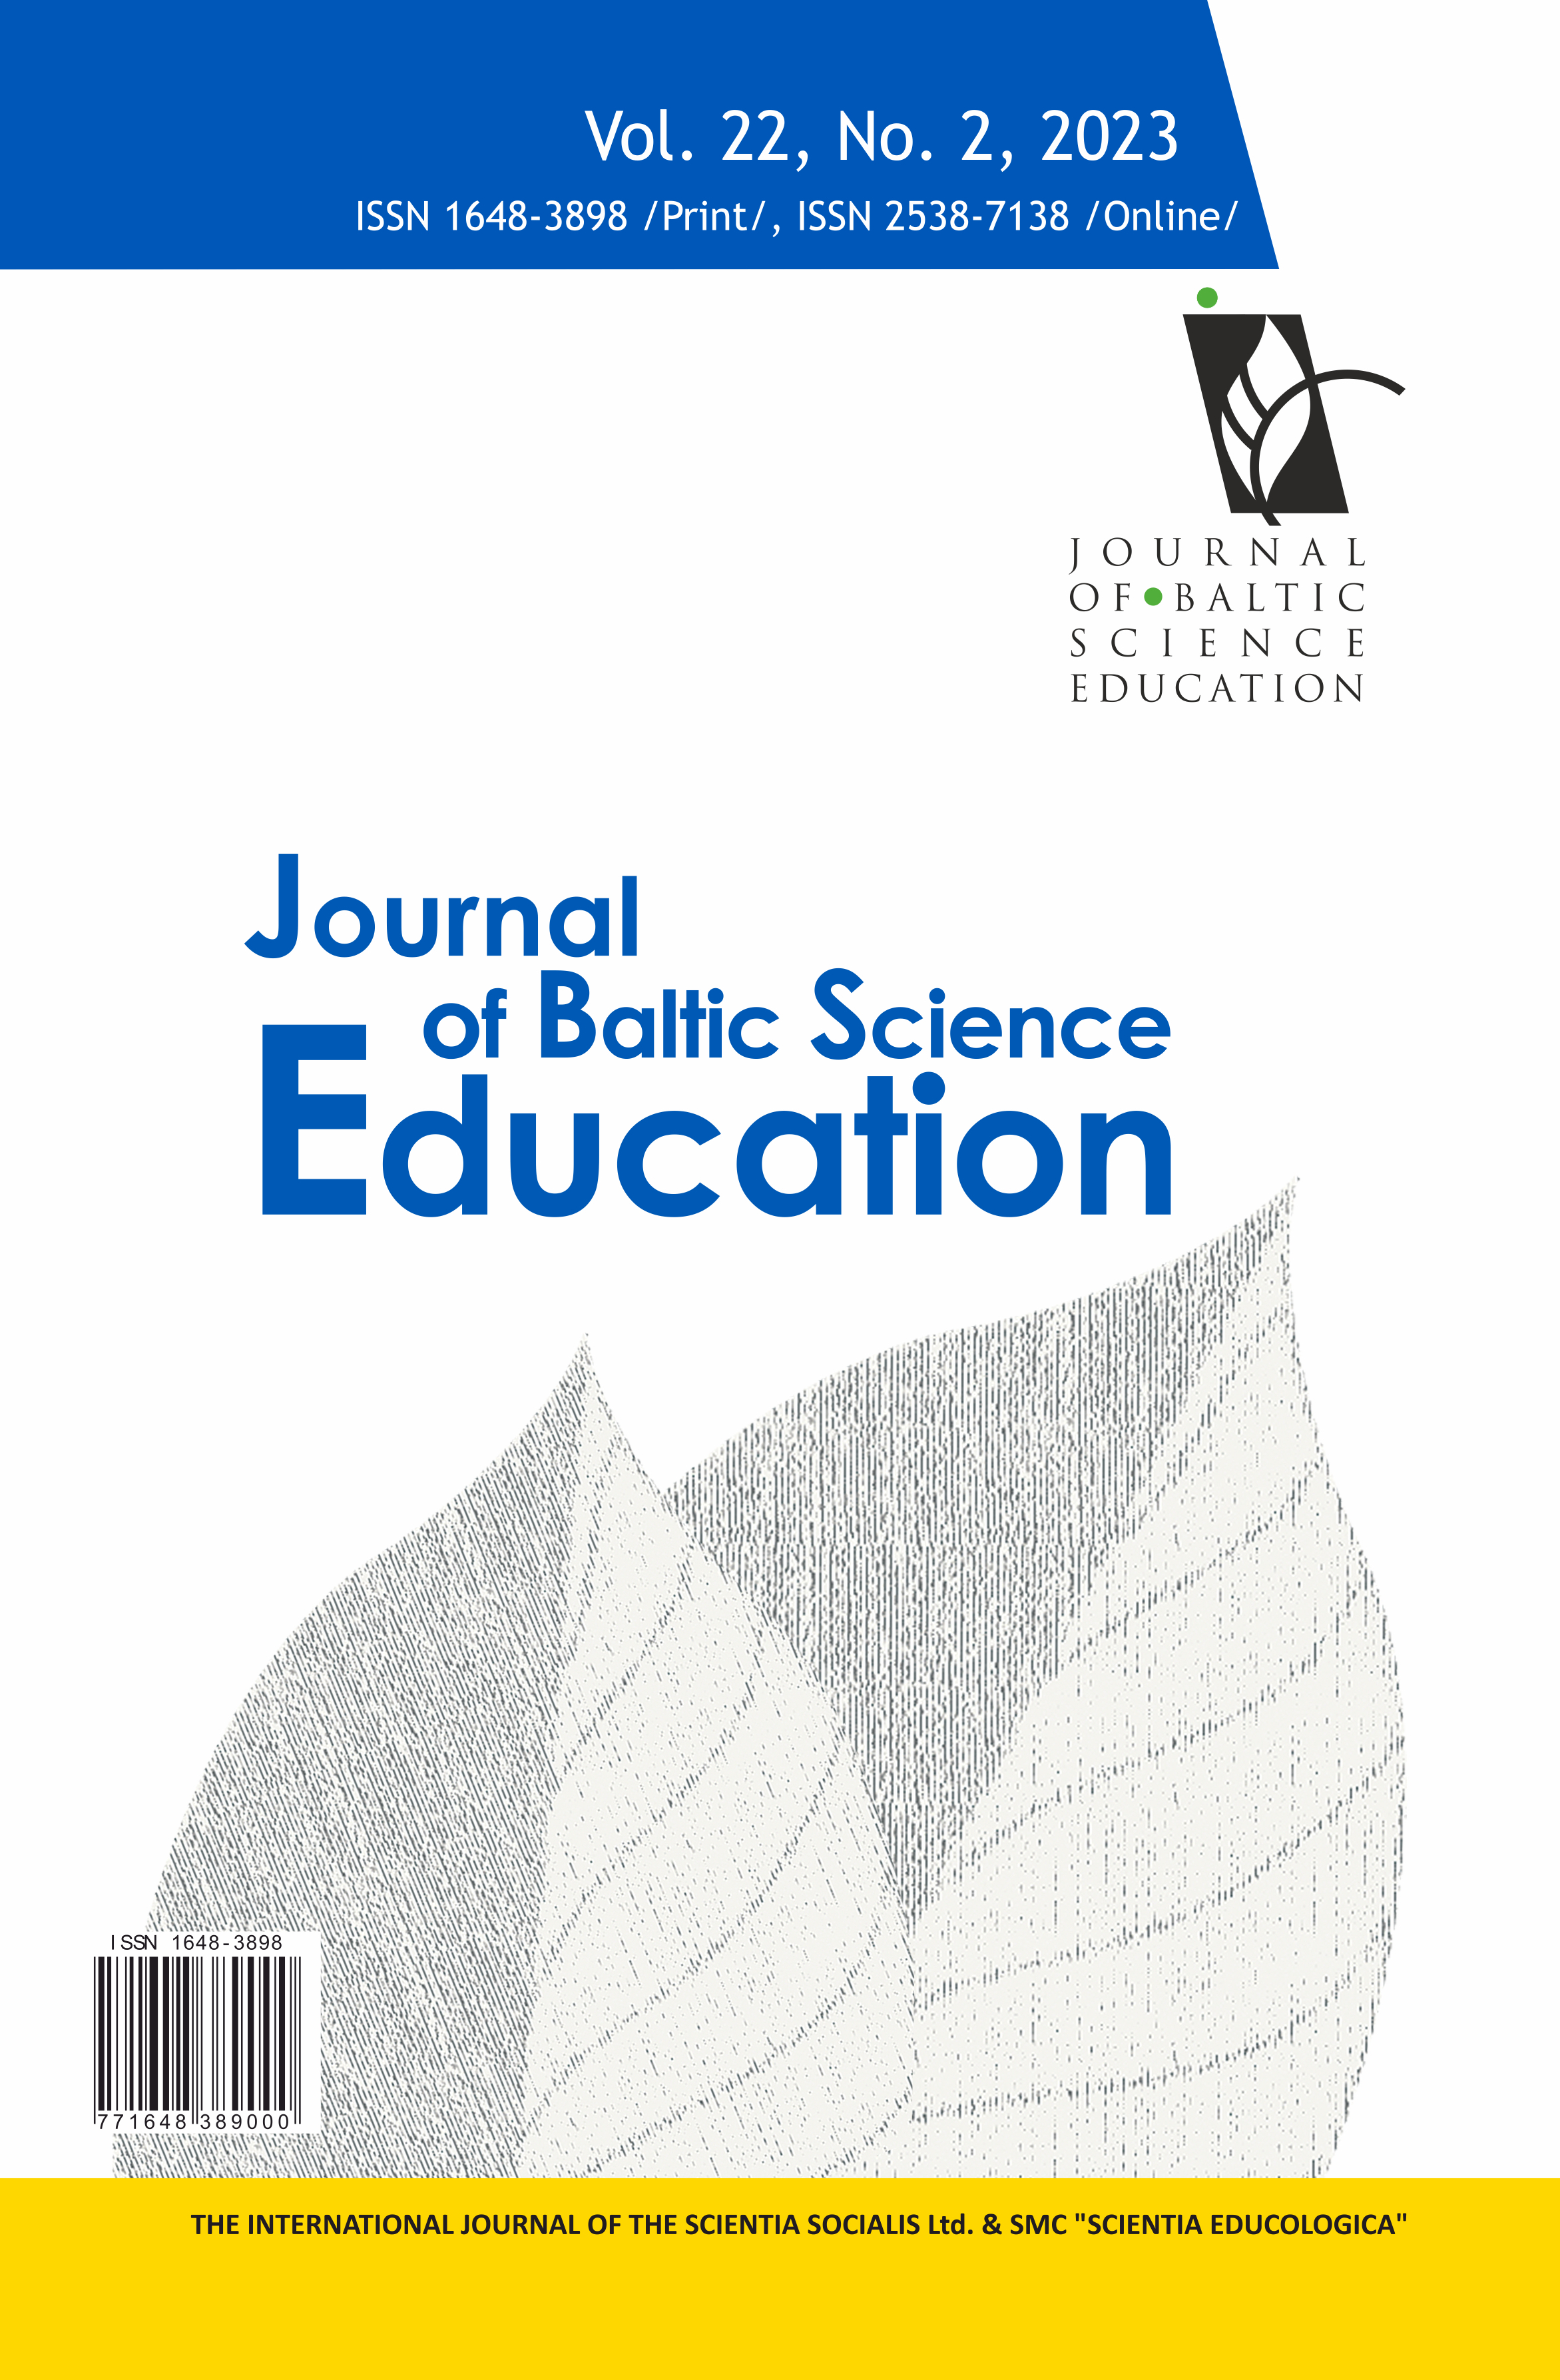 THE CHAIN MEDIATING ROLE OF PERCEIVED FAMILY SUPPORT FOR FORMAL AND INFORMAL SCIENCE LEARNING IN THE ASSOCIATION BETWEEN FAMILY SOCIOECONOMIC STATUS AND INFORMAL SCIENCE LEARNING EXPERIENCES Cover Image